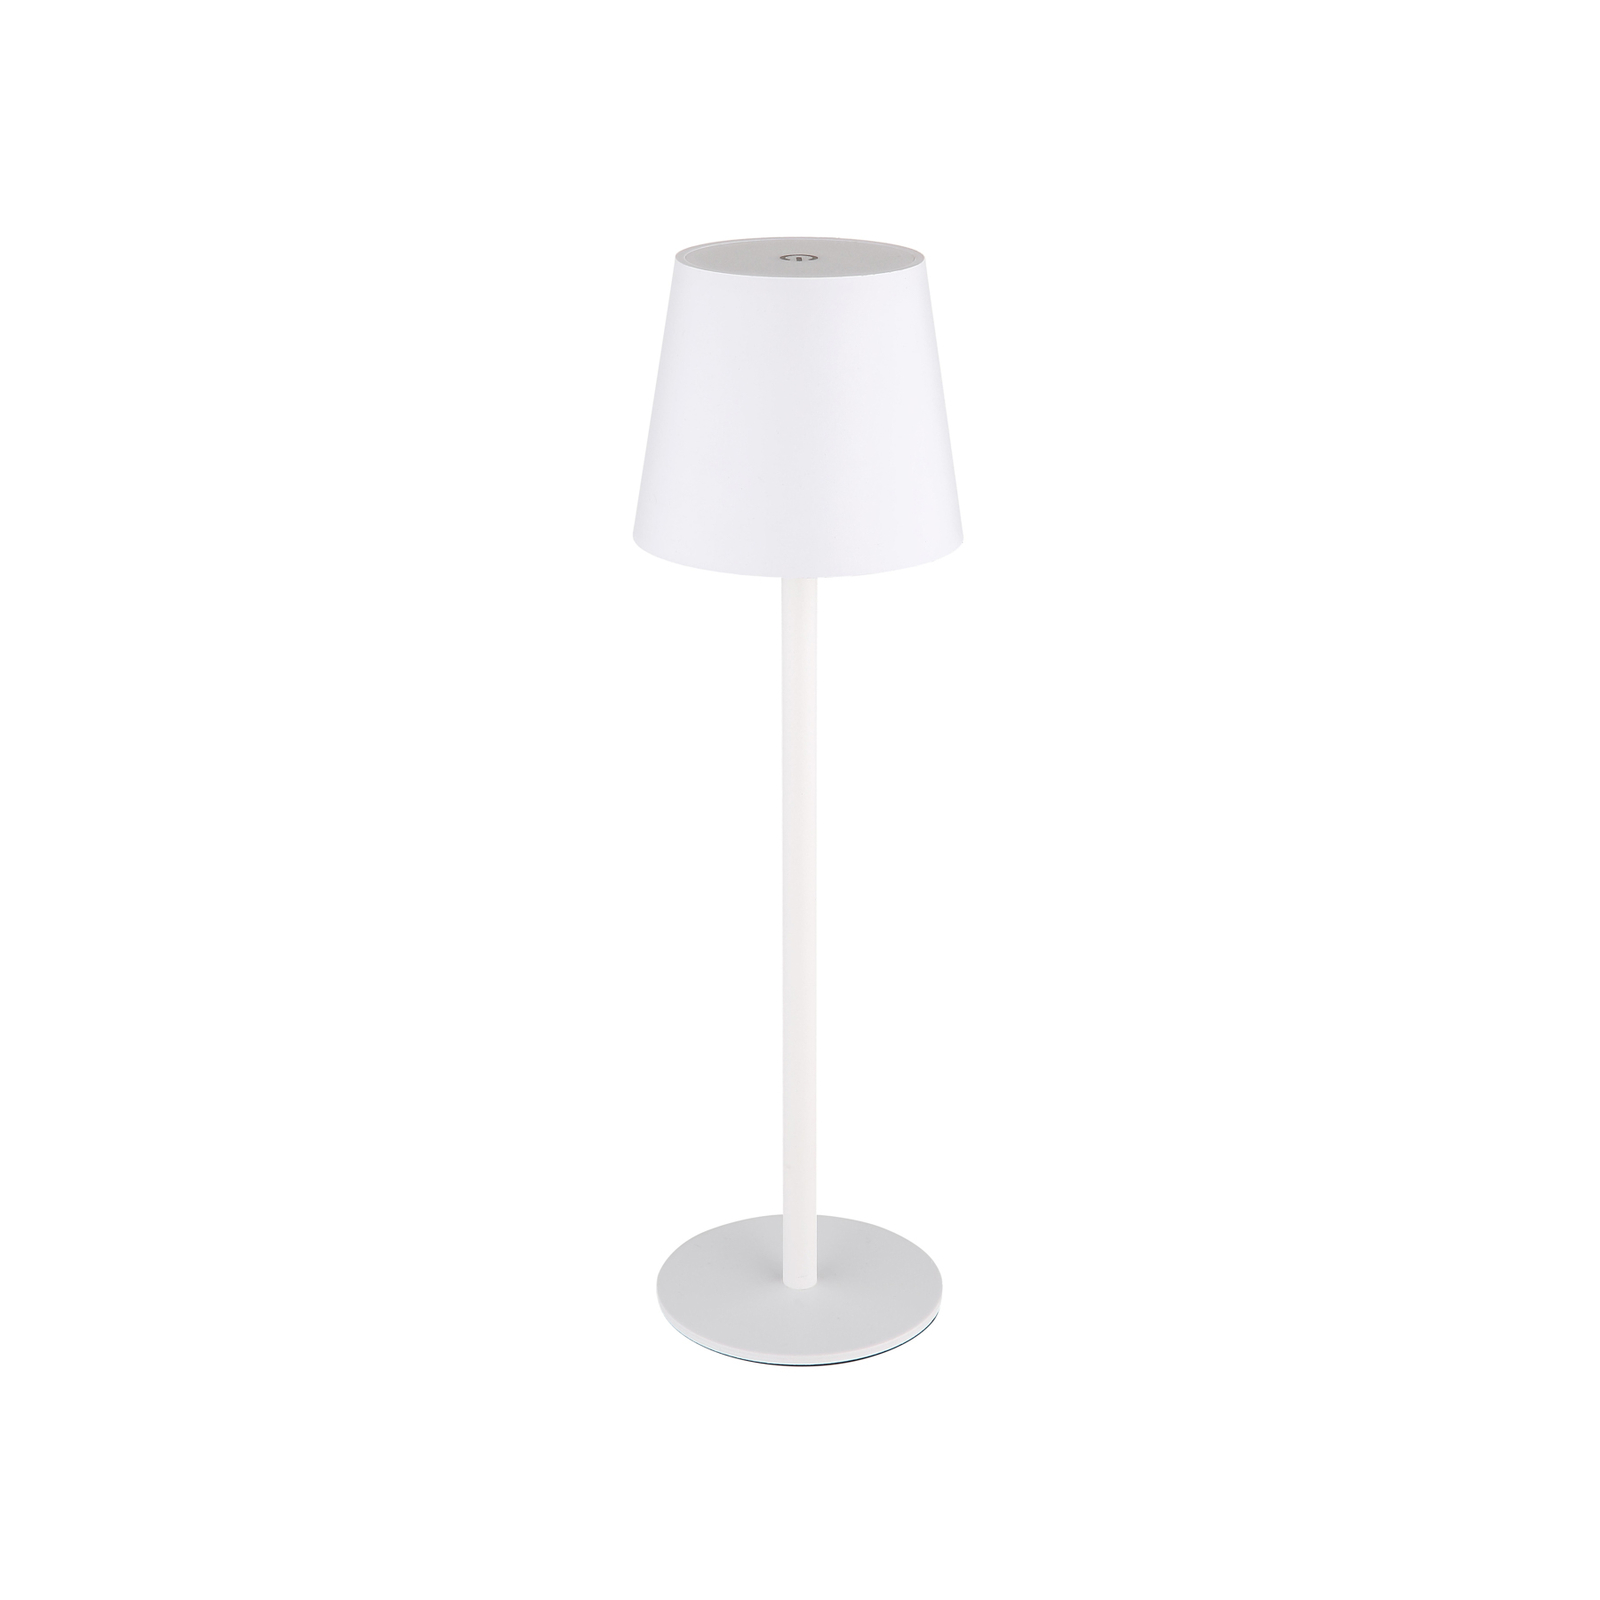 LED table lamp Vannie, white, height 36 cm, CCT